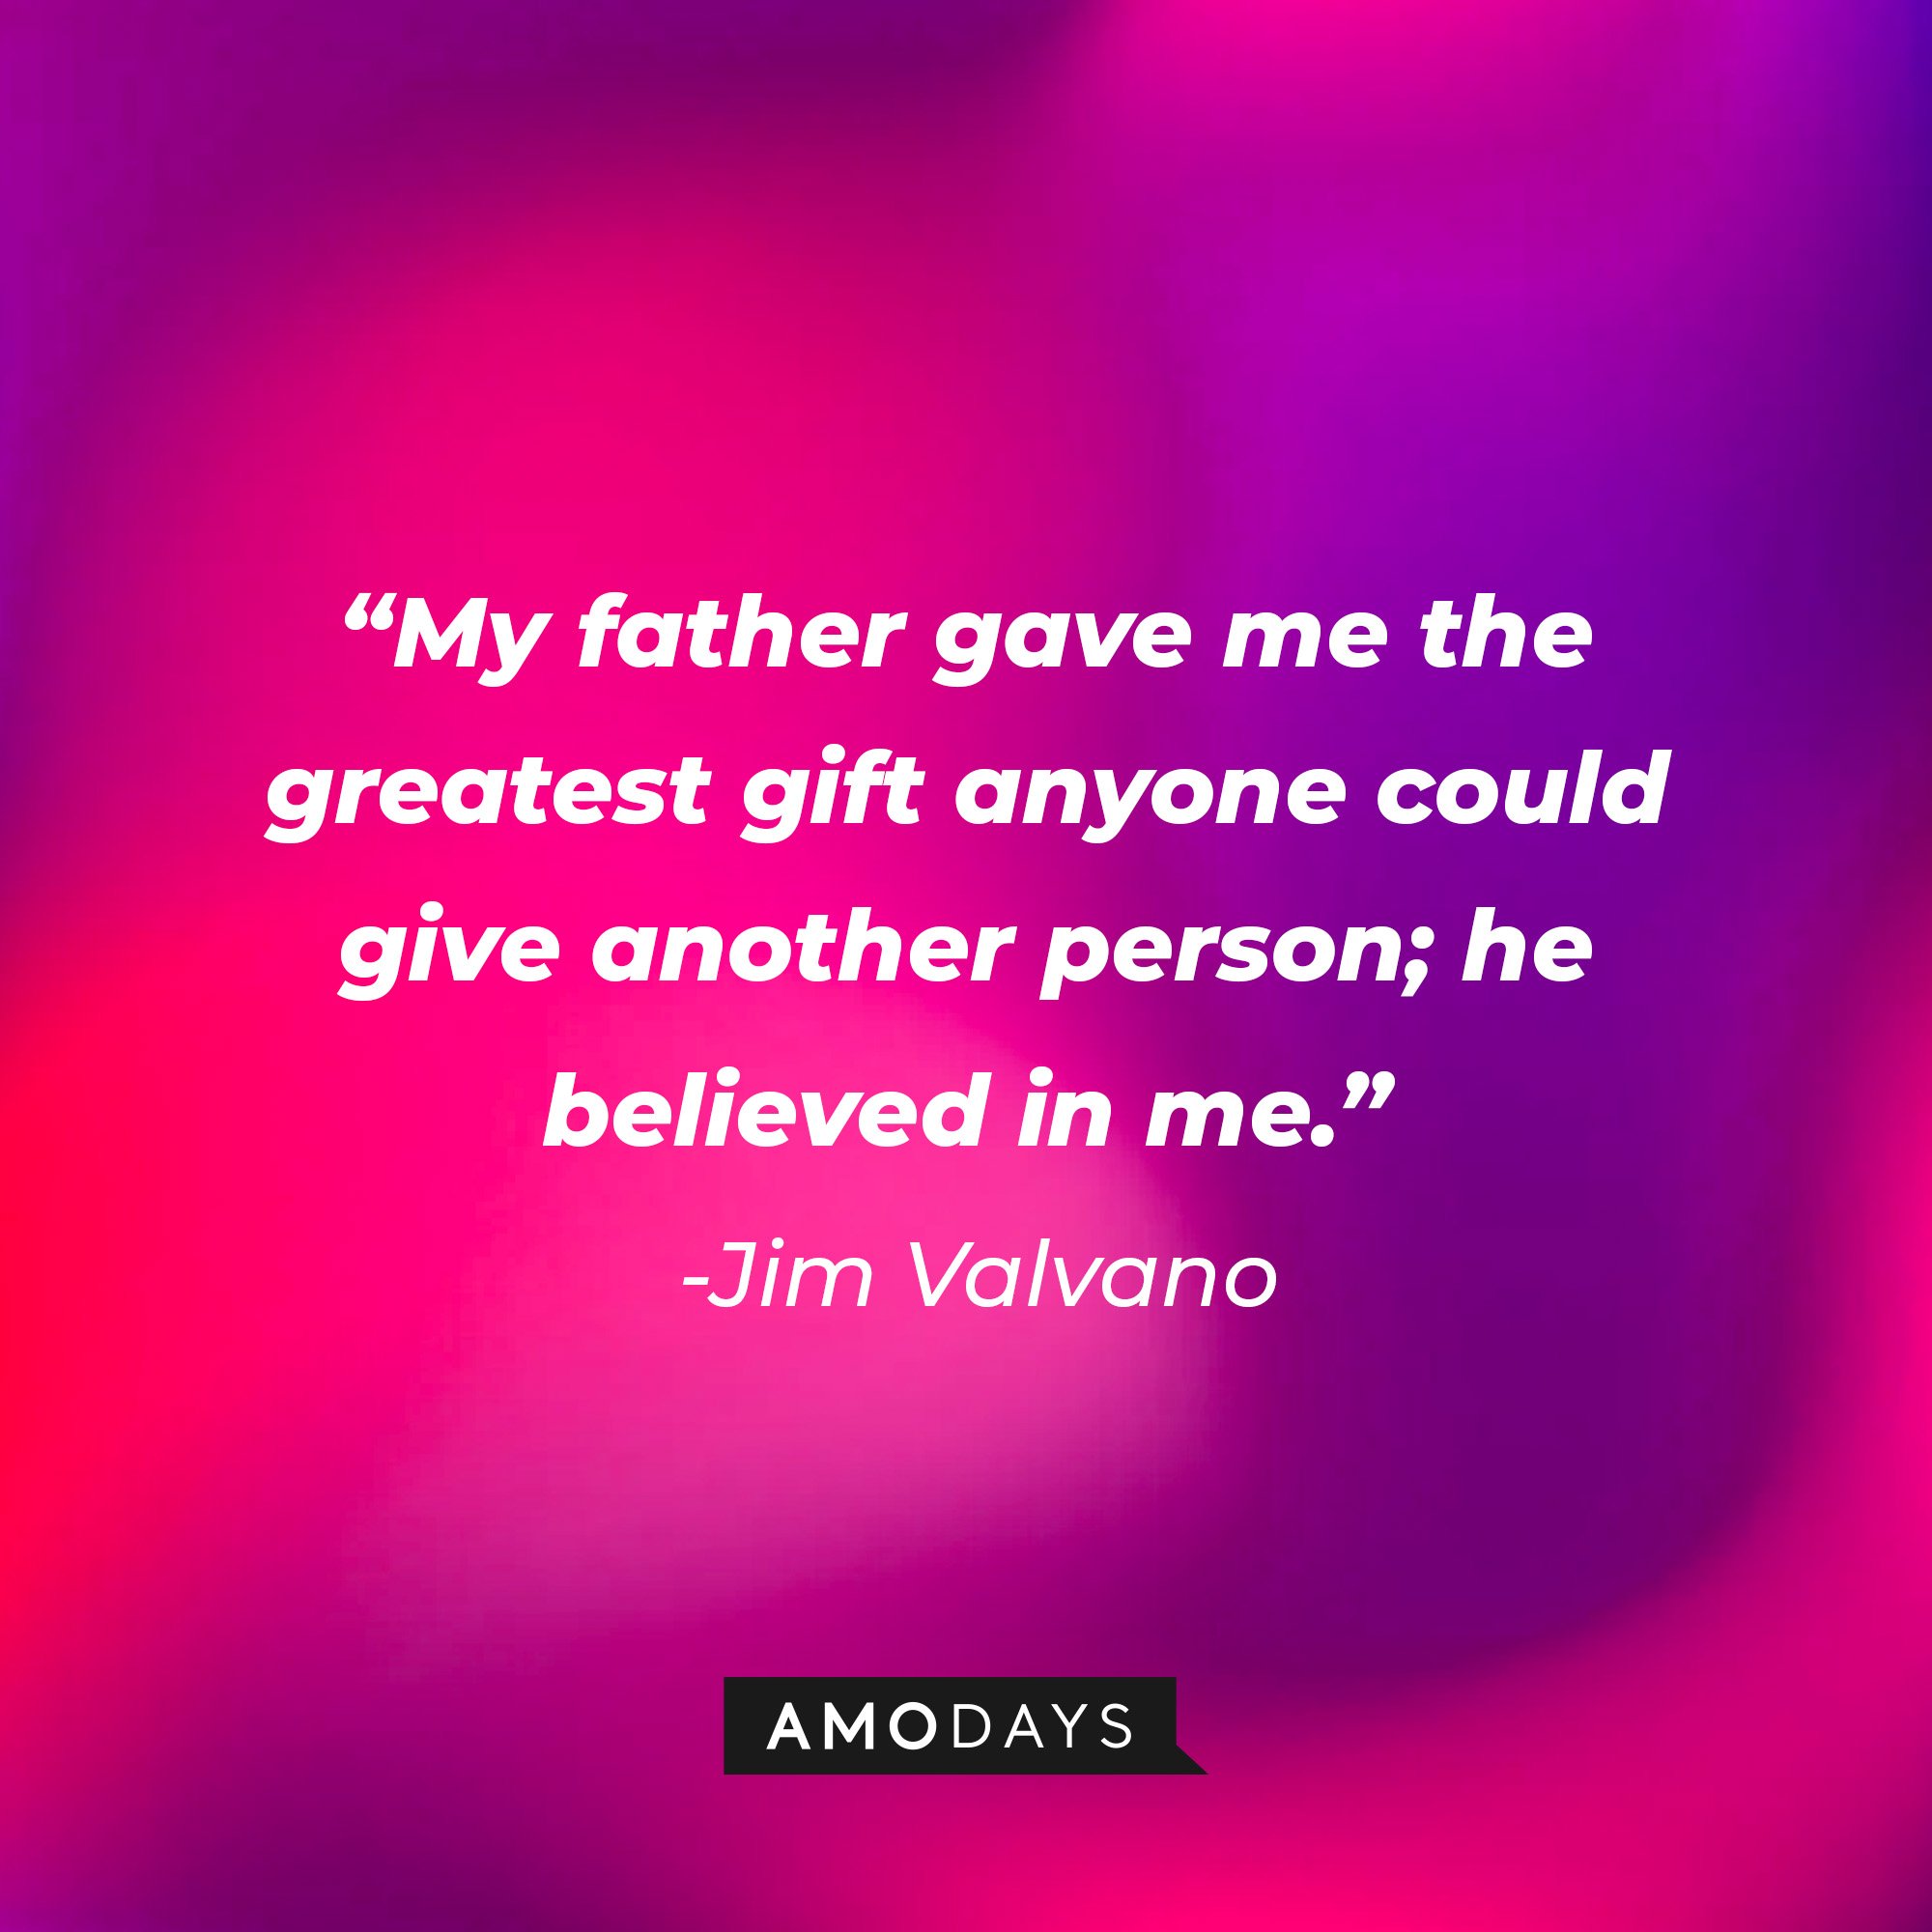 Jim Valvano’s quote: "My father gave me the greatest gift anyone could give another person; he believed in me." | Image: AmoDays